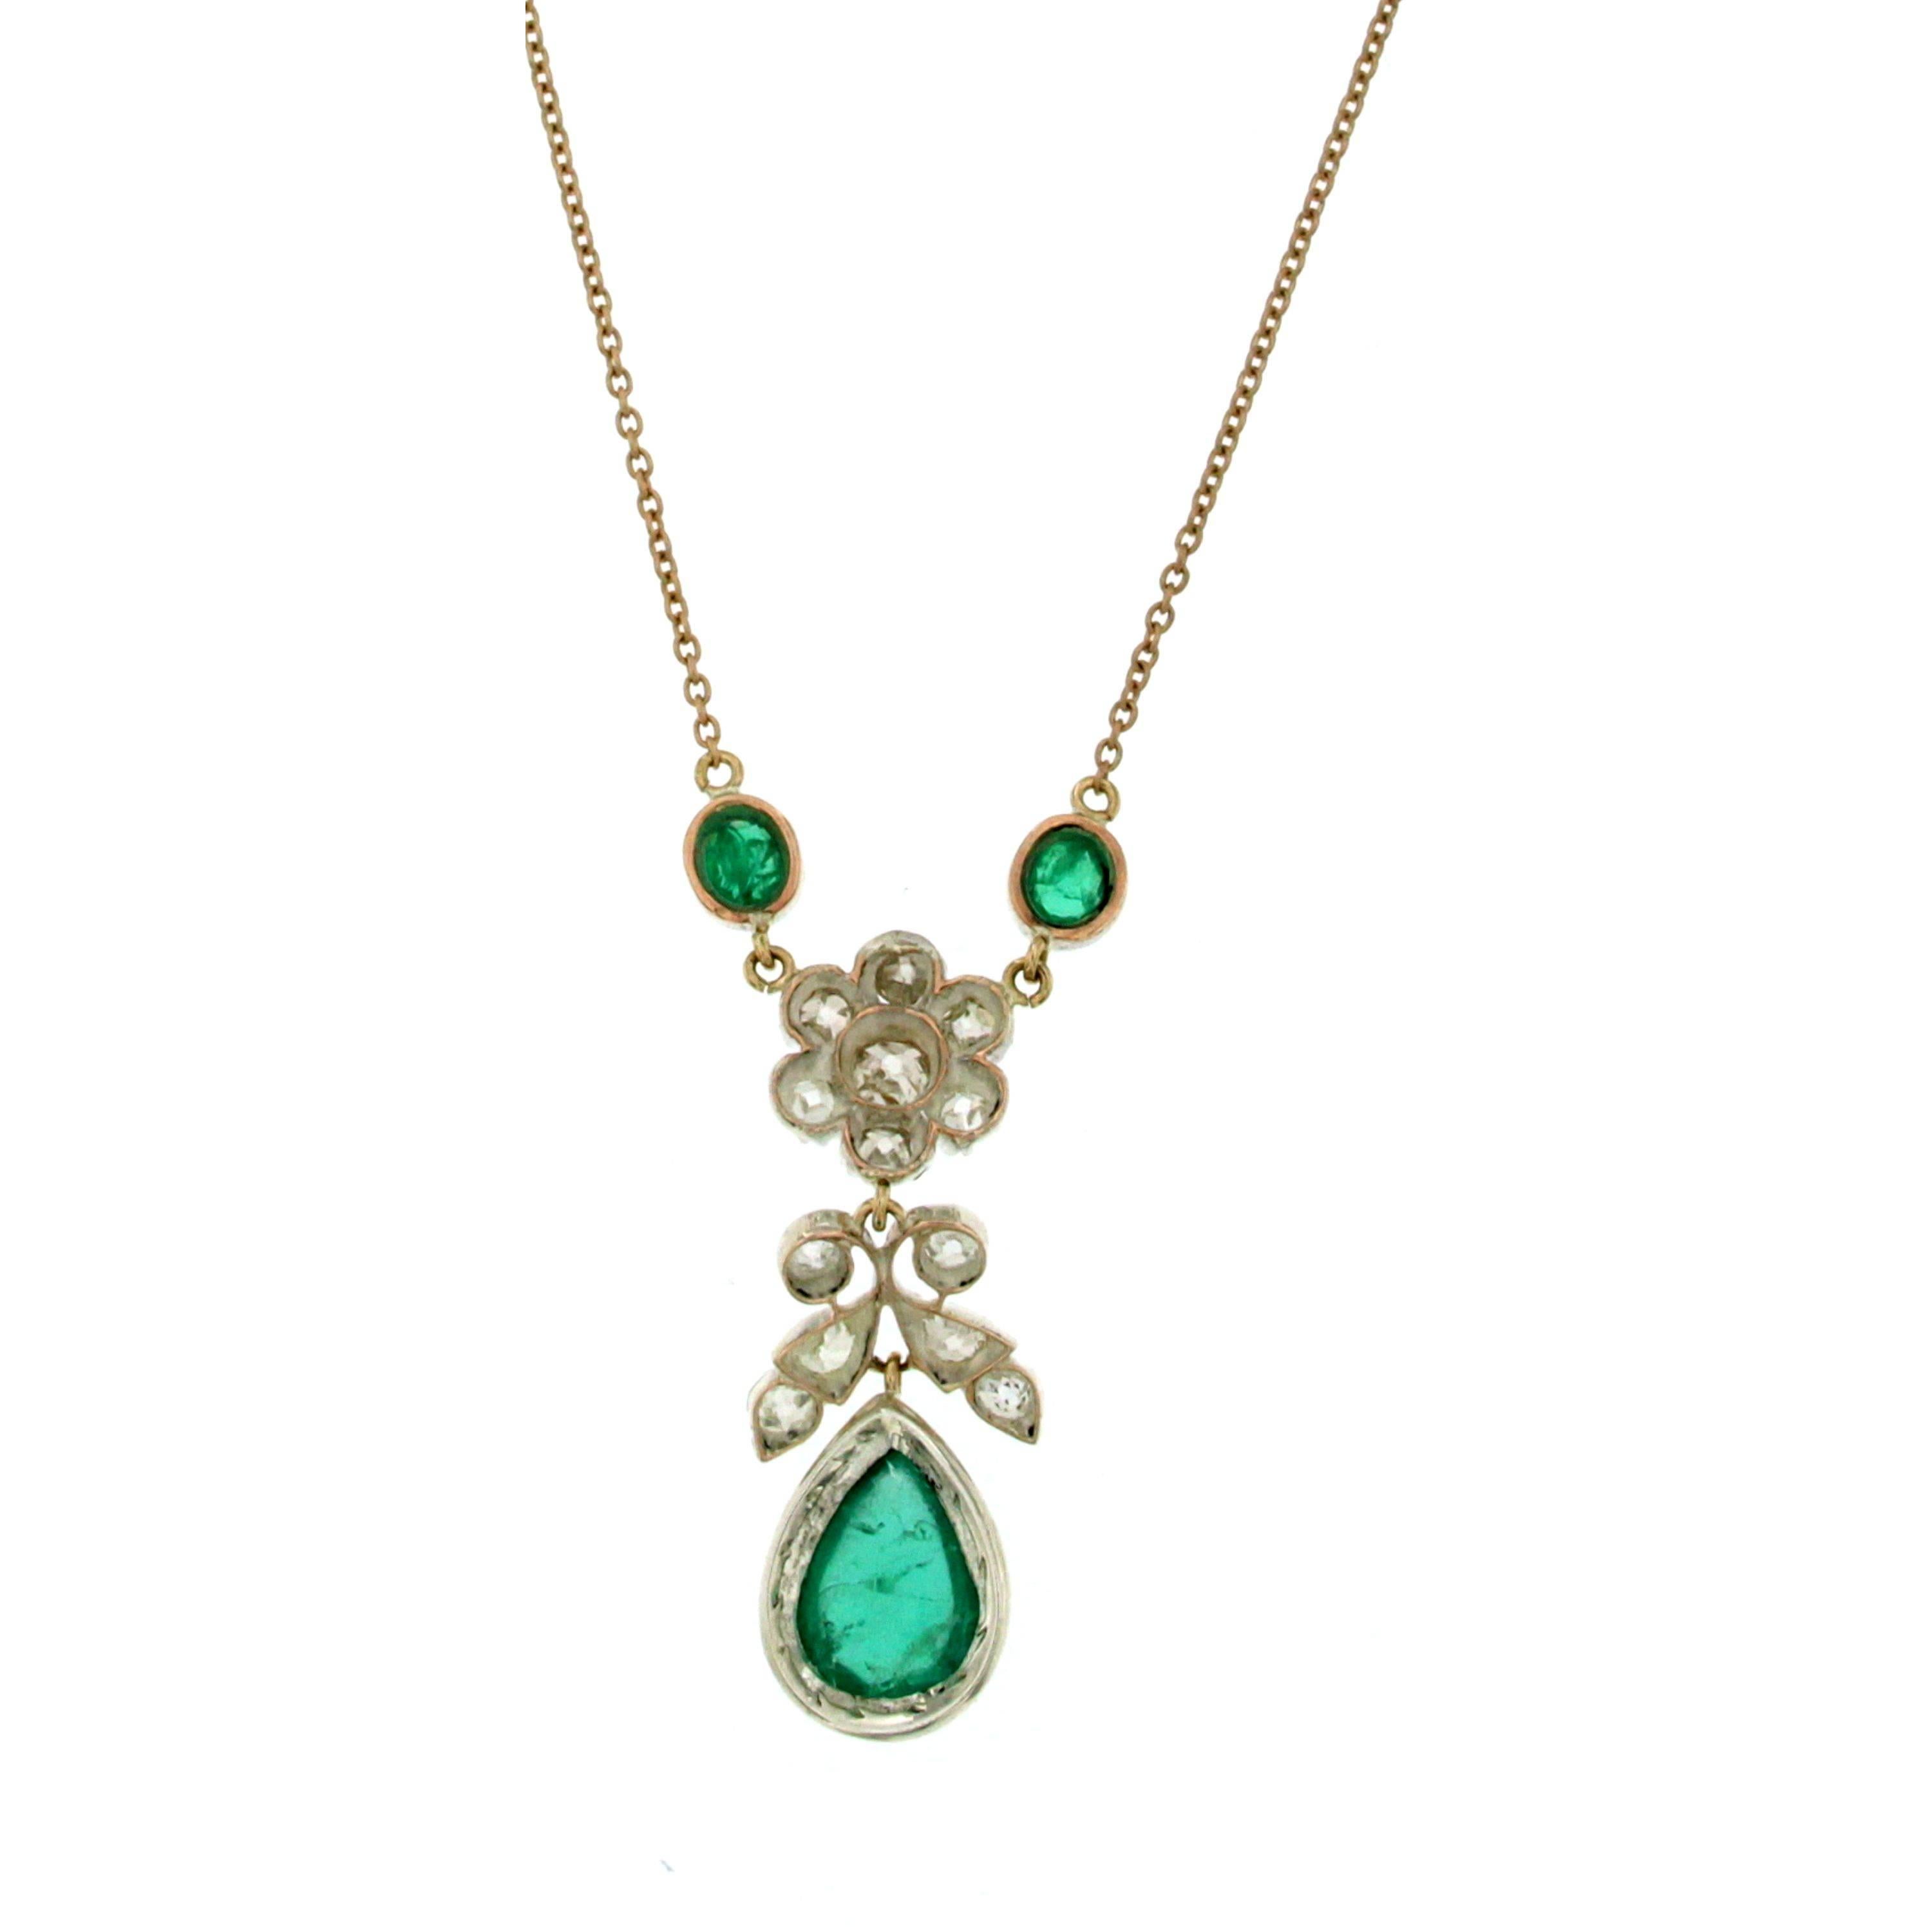 A beautiful 18 karat yellow and white gold necklace featuring at the bottom a drop shape Natural Vivid Cabochon Emerald, Colombian origin, weighing 2,60 carat, set in an Old Mine cut Diamonds flower and leaves design suspended by two oval Colombian